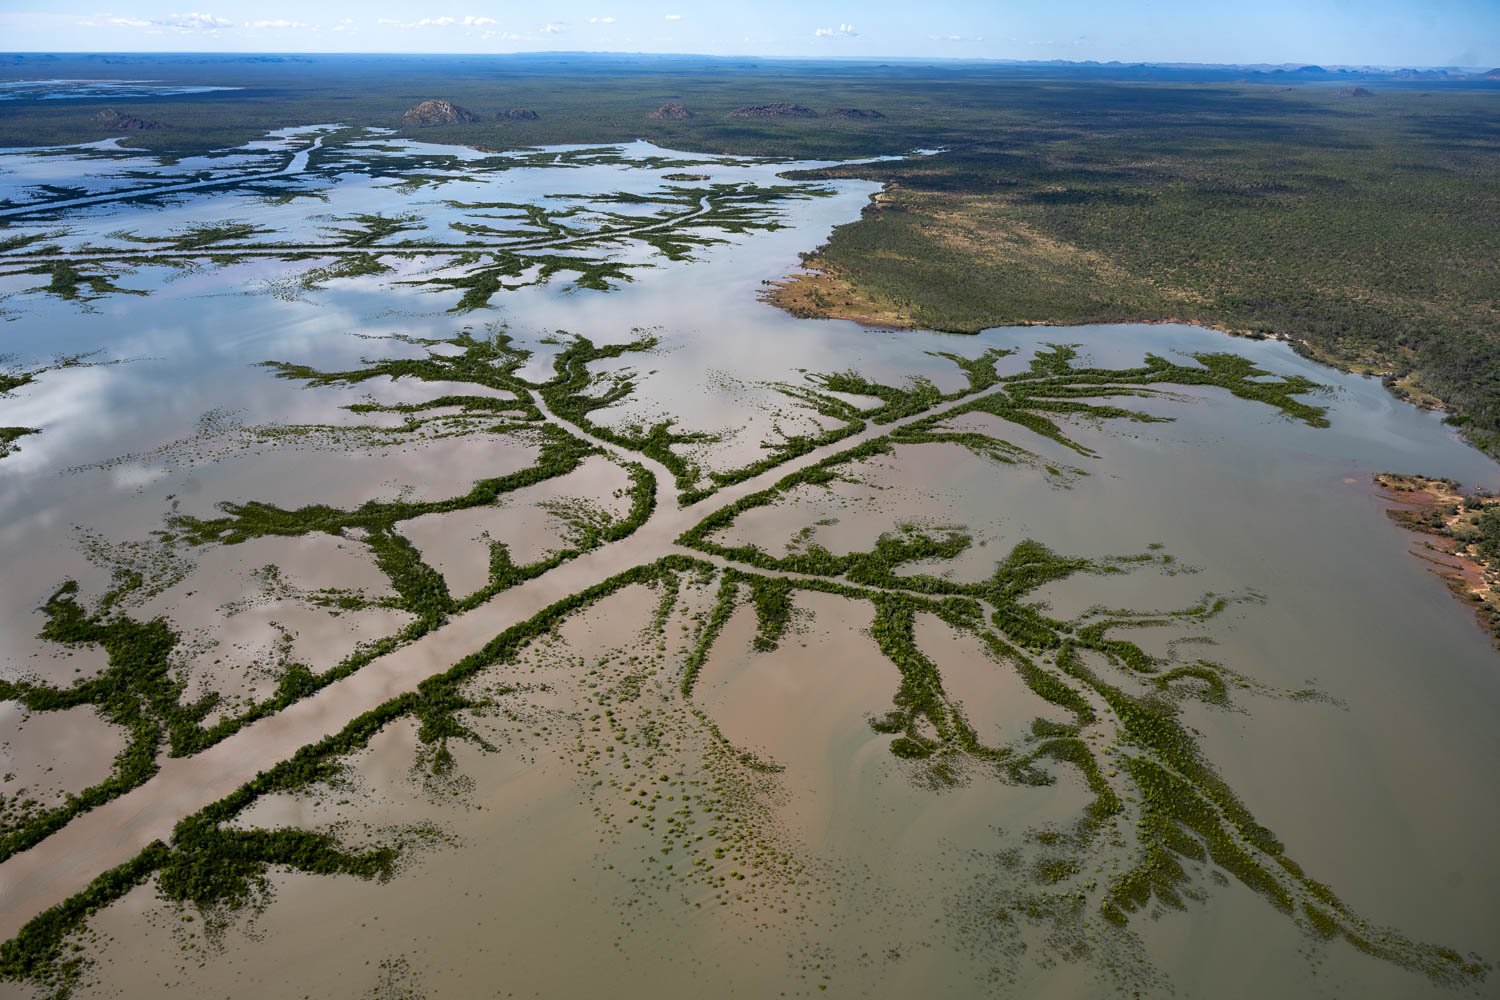 A long treelike shape of green colour having branches is formed on the oceanic surface with the land connecting to the area filled with ground greenery and a shining view of sunlight, and a clear sky, Cambridge Gulf, The Kimberley  